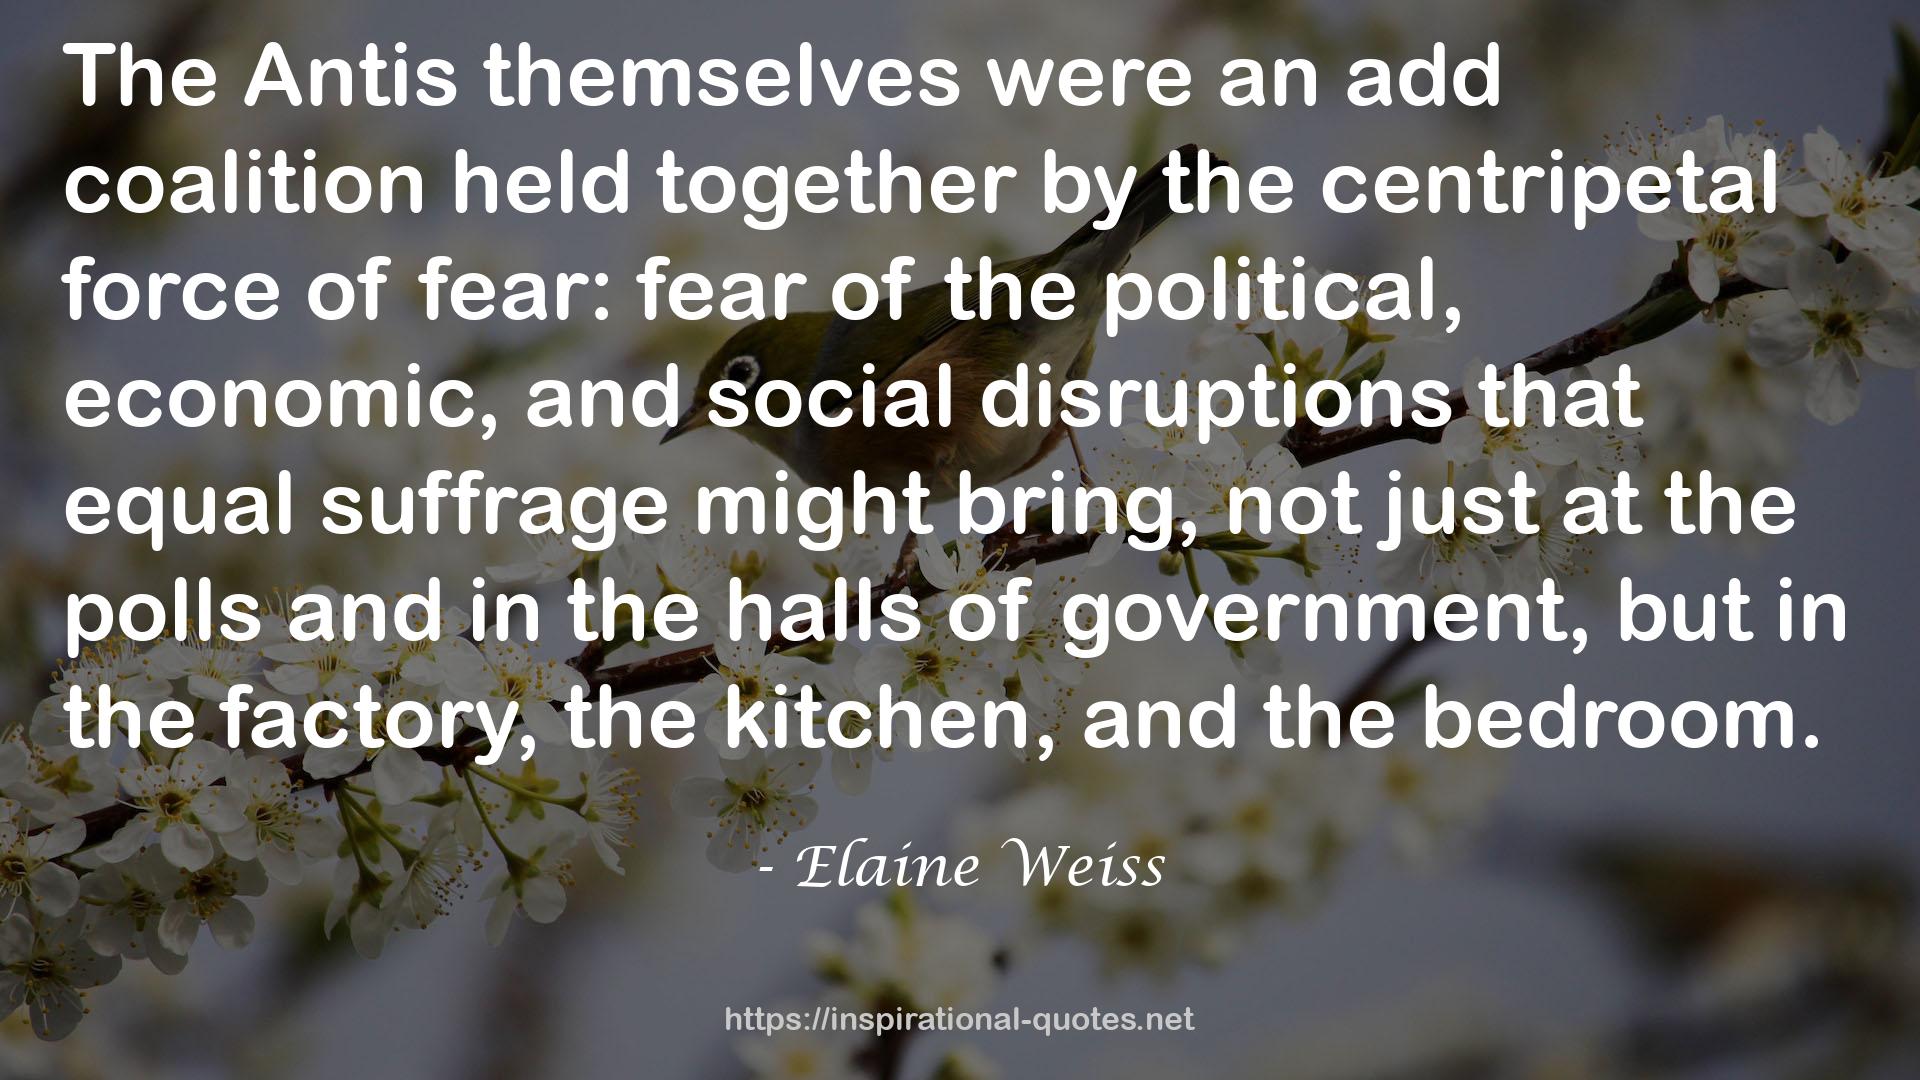 Elaine Weiss QUOTES